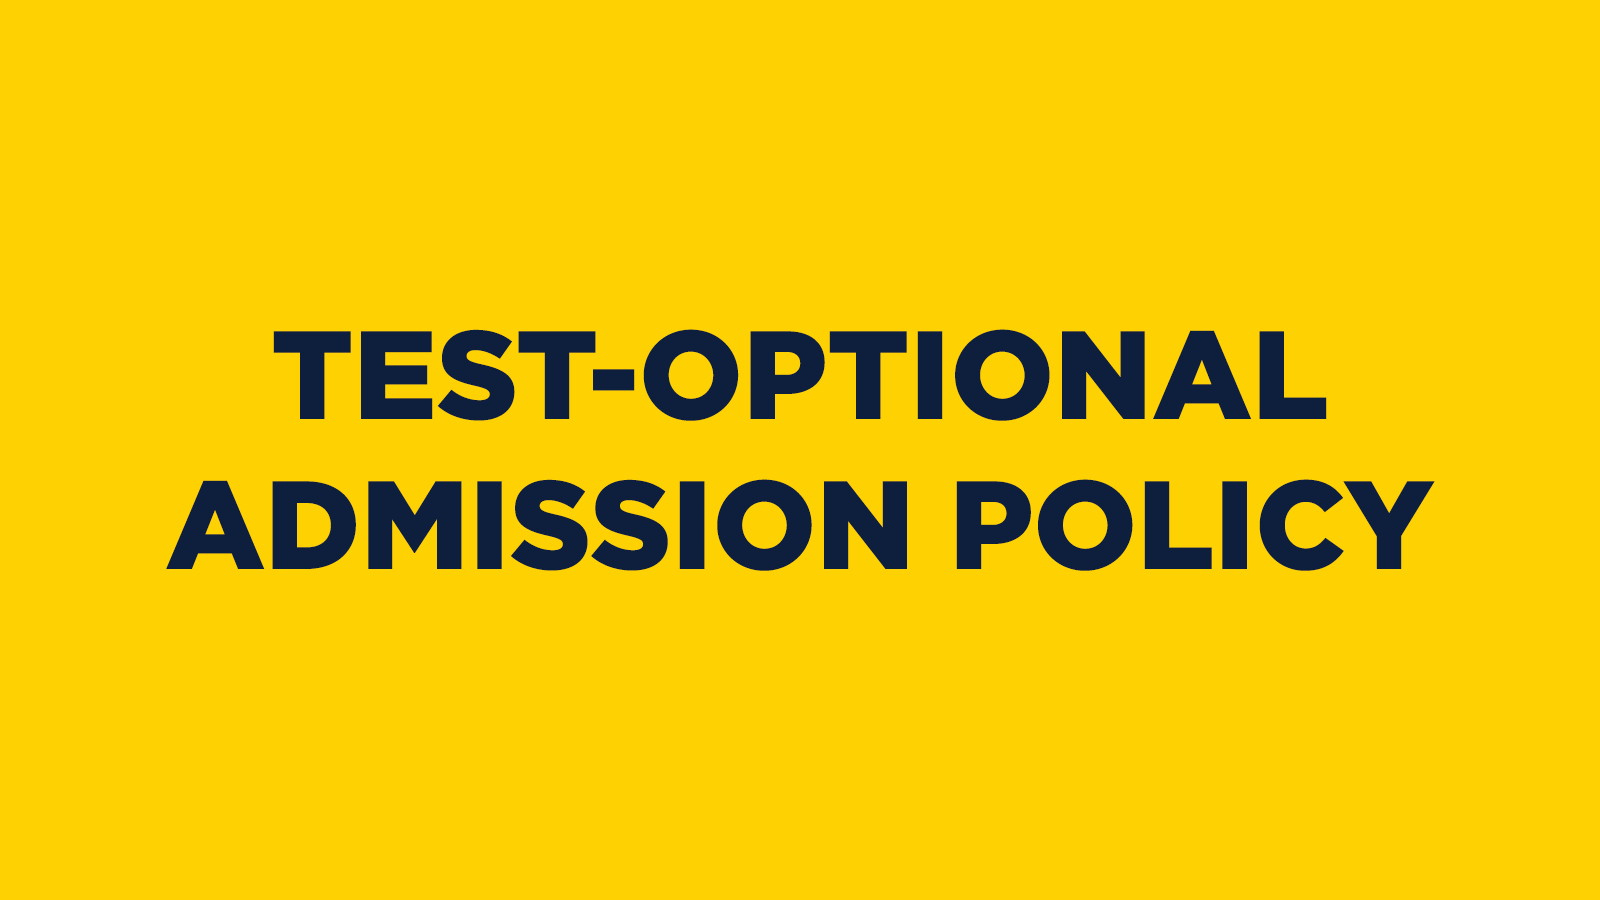 Test-Optional Admission Policy